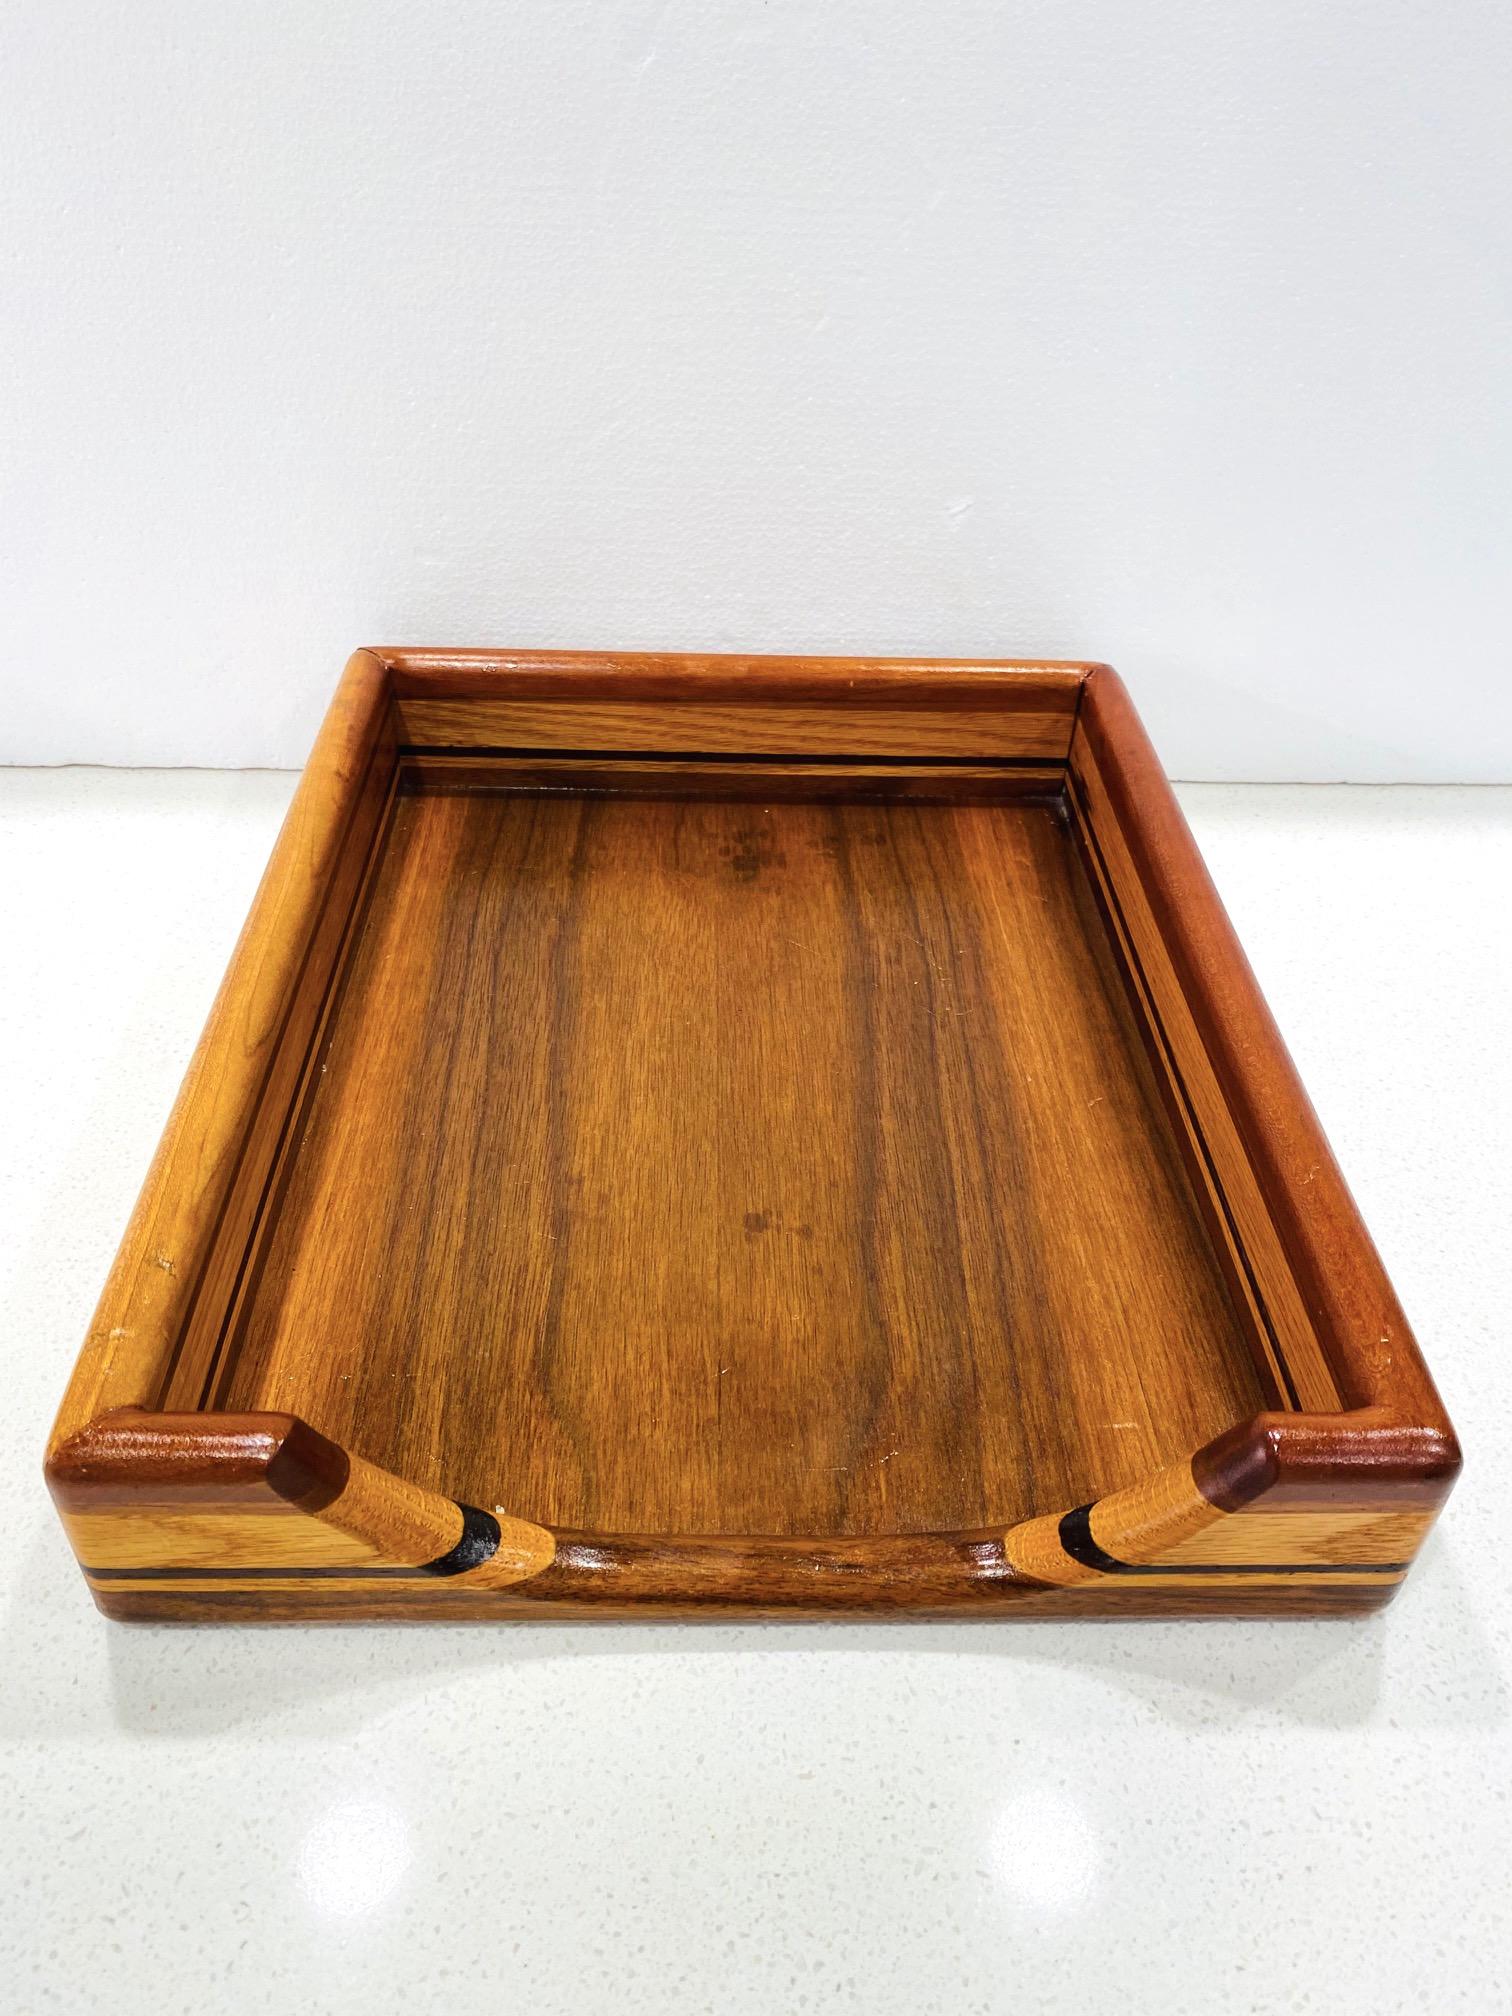 Mid-Century Modern paper and letter tray with streamline design, circa 1970. Comprised of handcrafted teak, maple, and walnut woods, creating stunning stripes with variegated wood tonalities and colors, and with beautiful wood grains throughout.